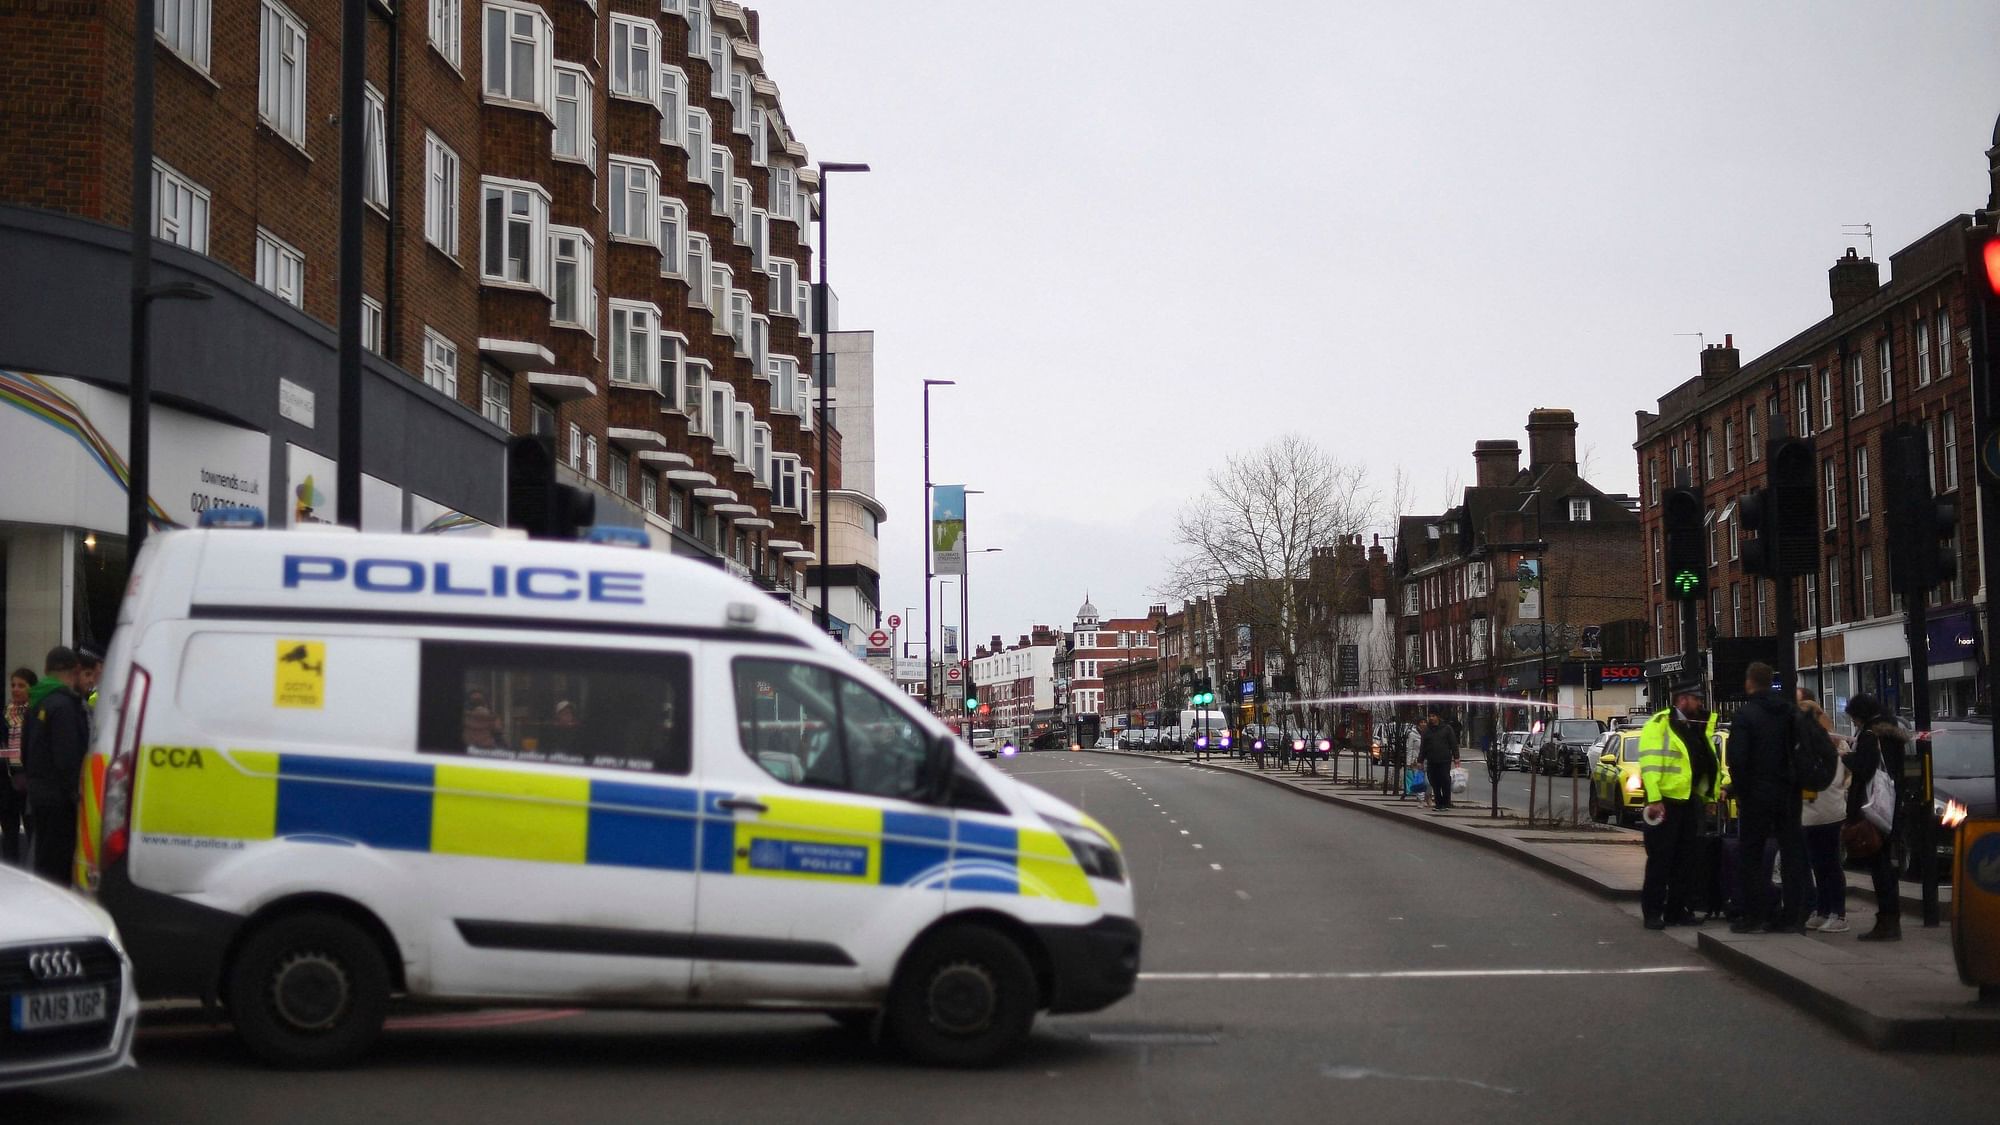 Police at the scene after an incident in Streatham, London, Sunday, 2 February. London police say officers shot a man during a terrorism-related incident that involved the stabbings of a number of people.